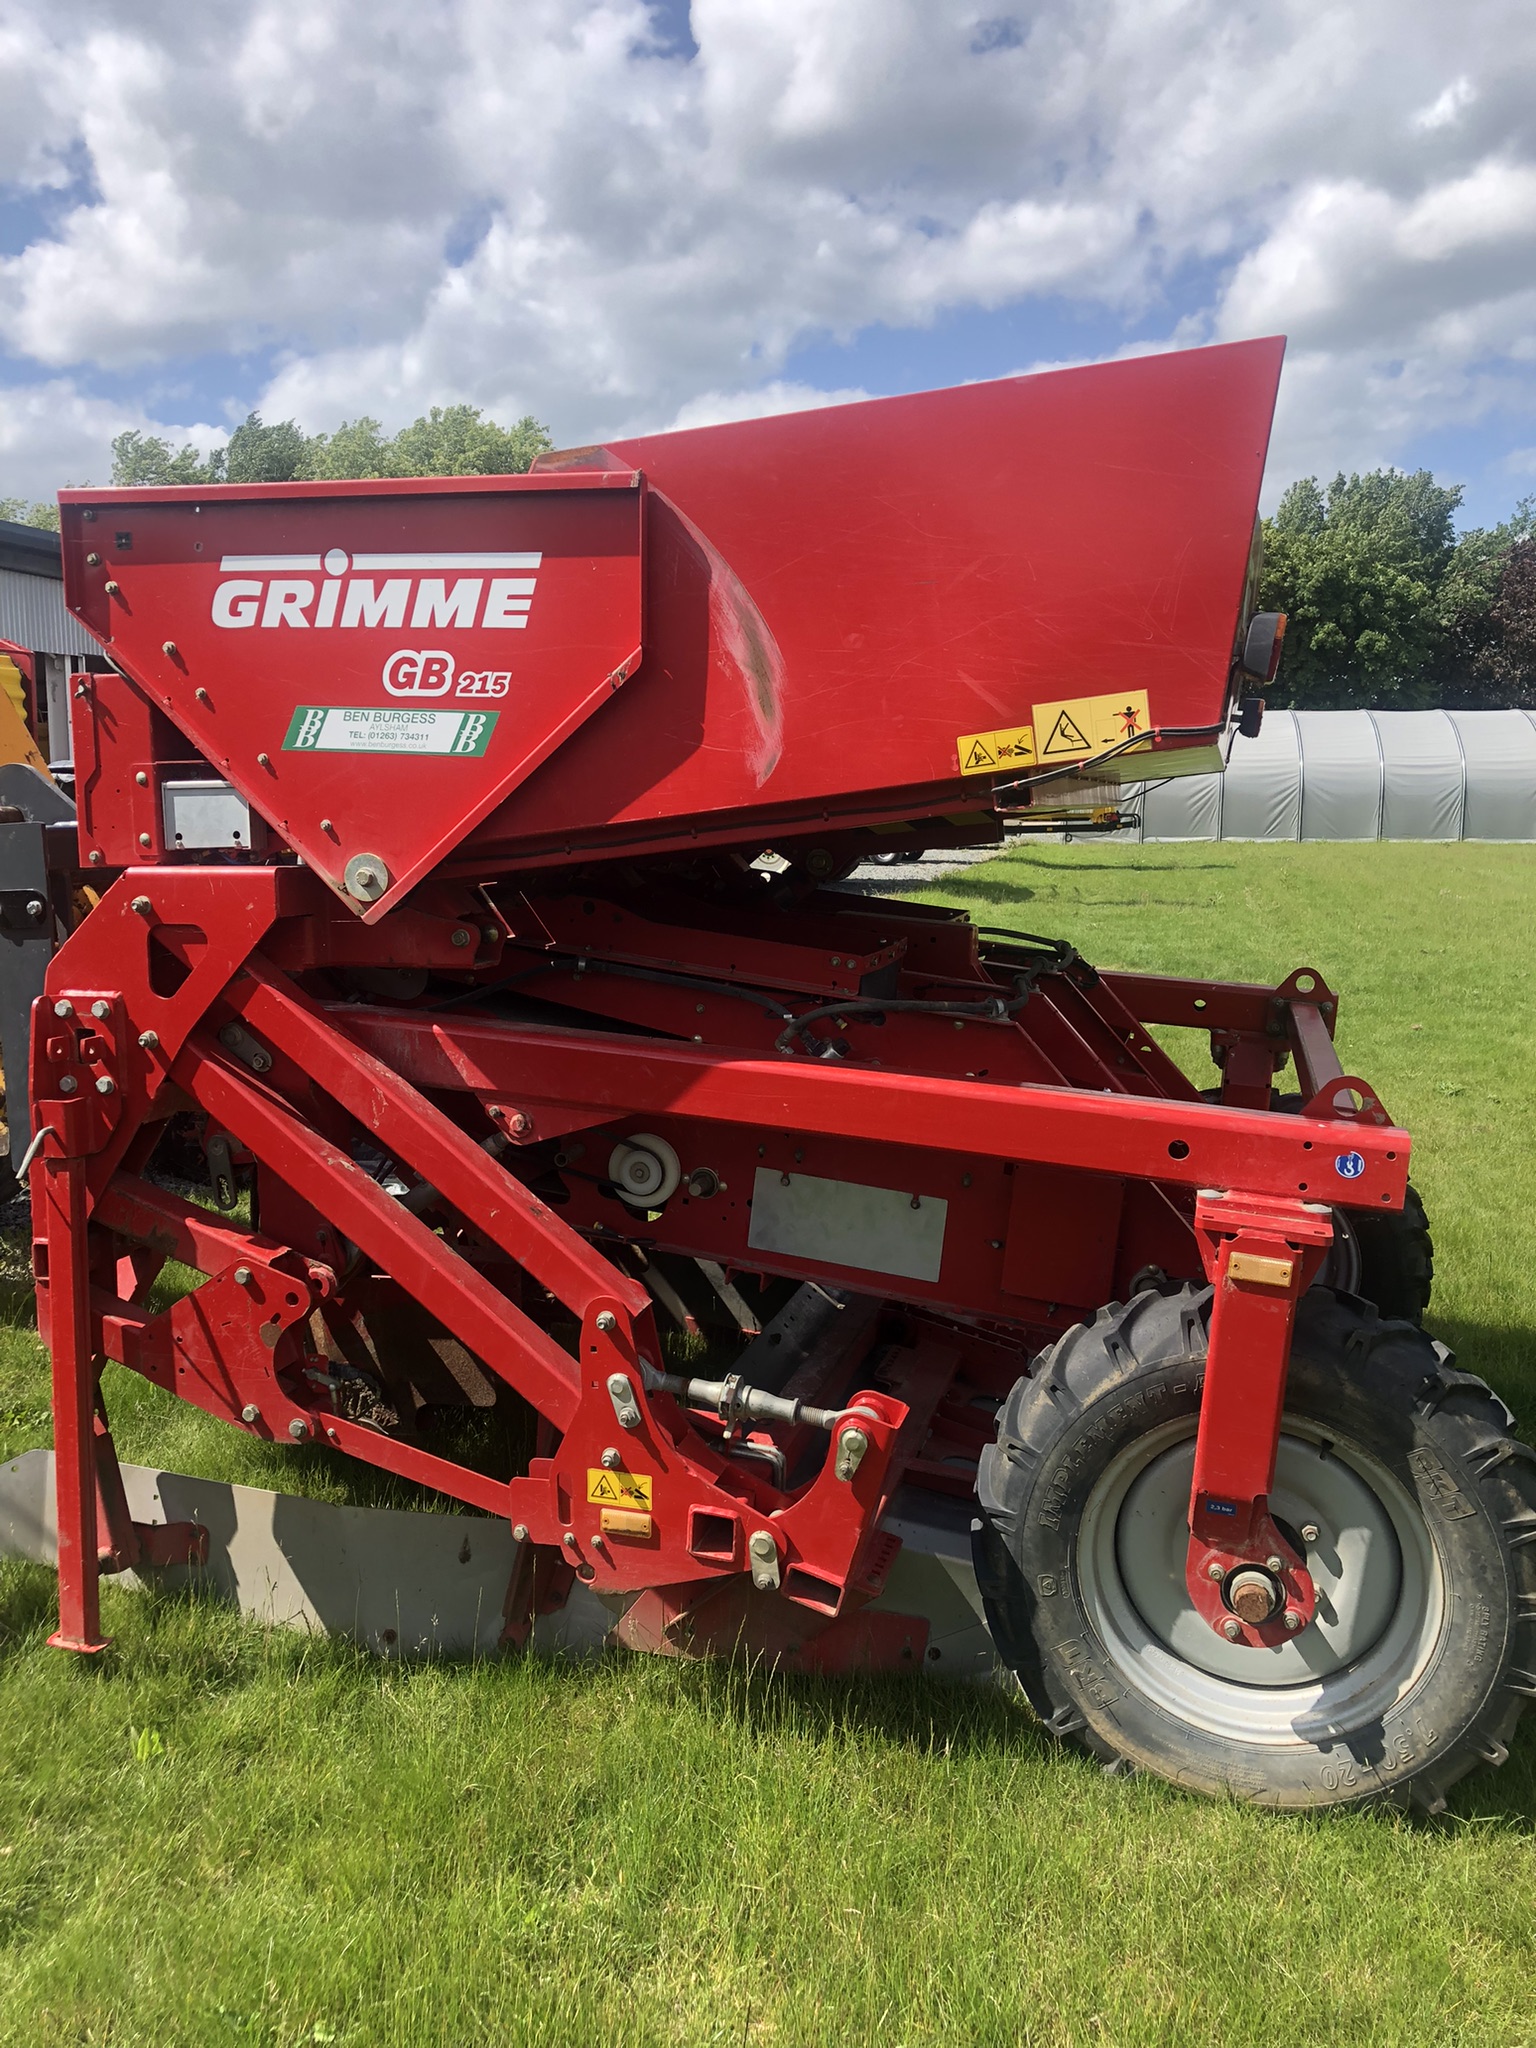 Updated photos of the Grimme GB215 2011